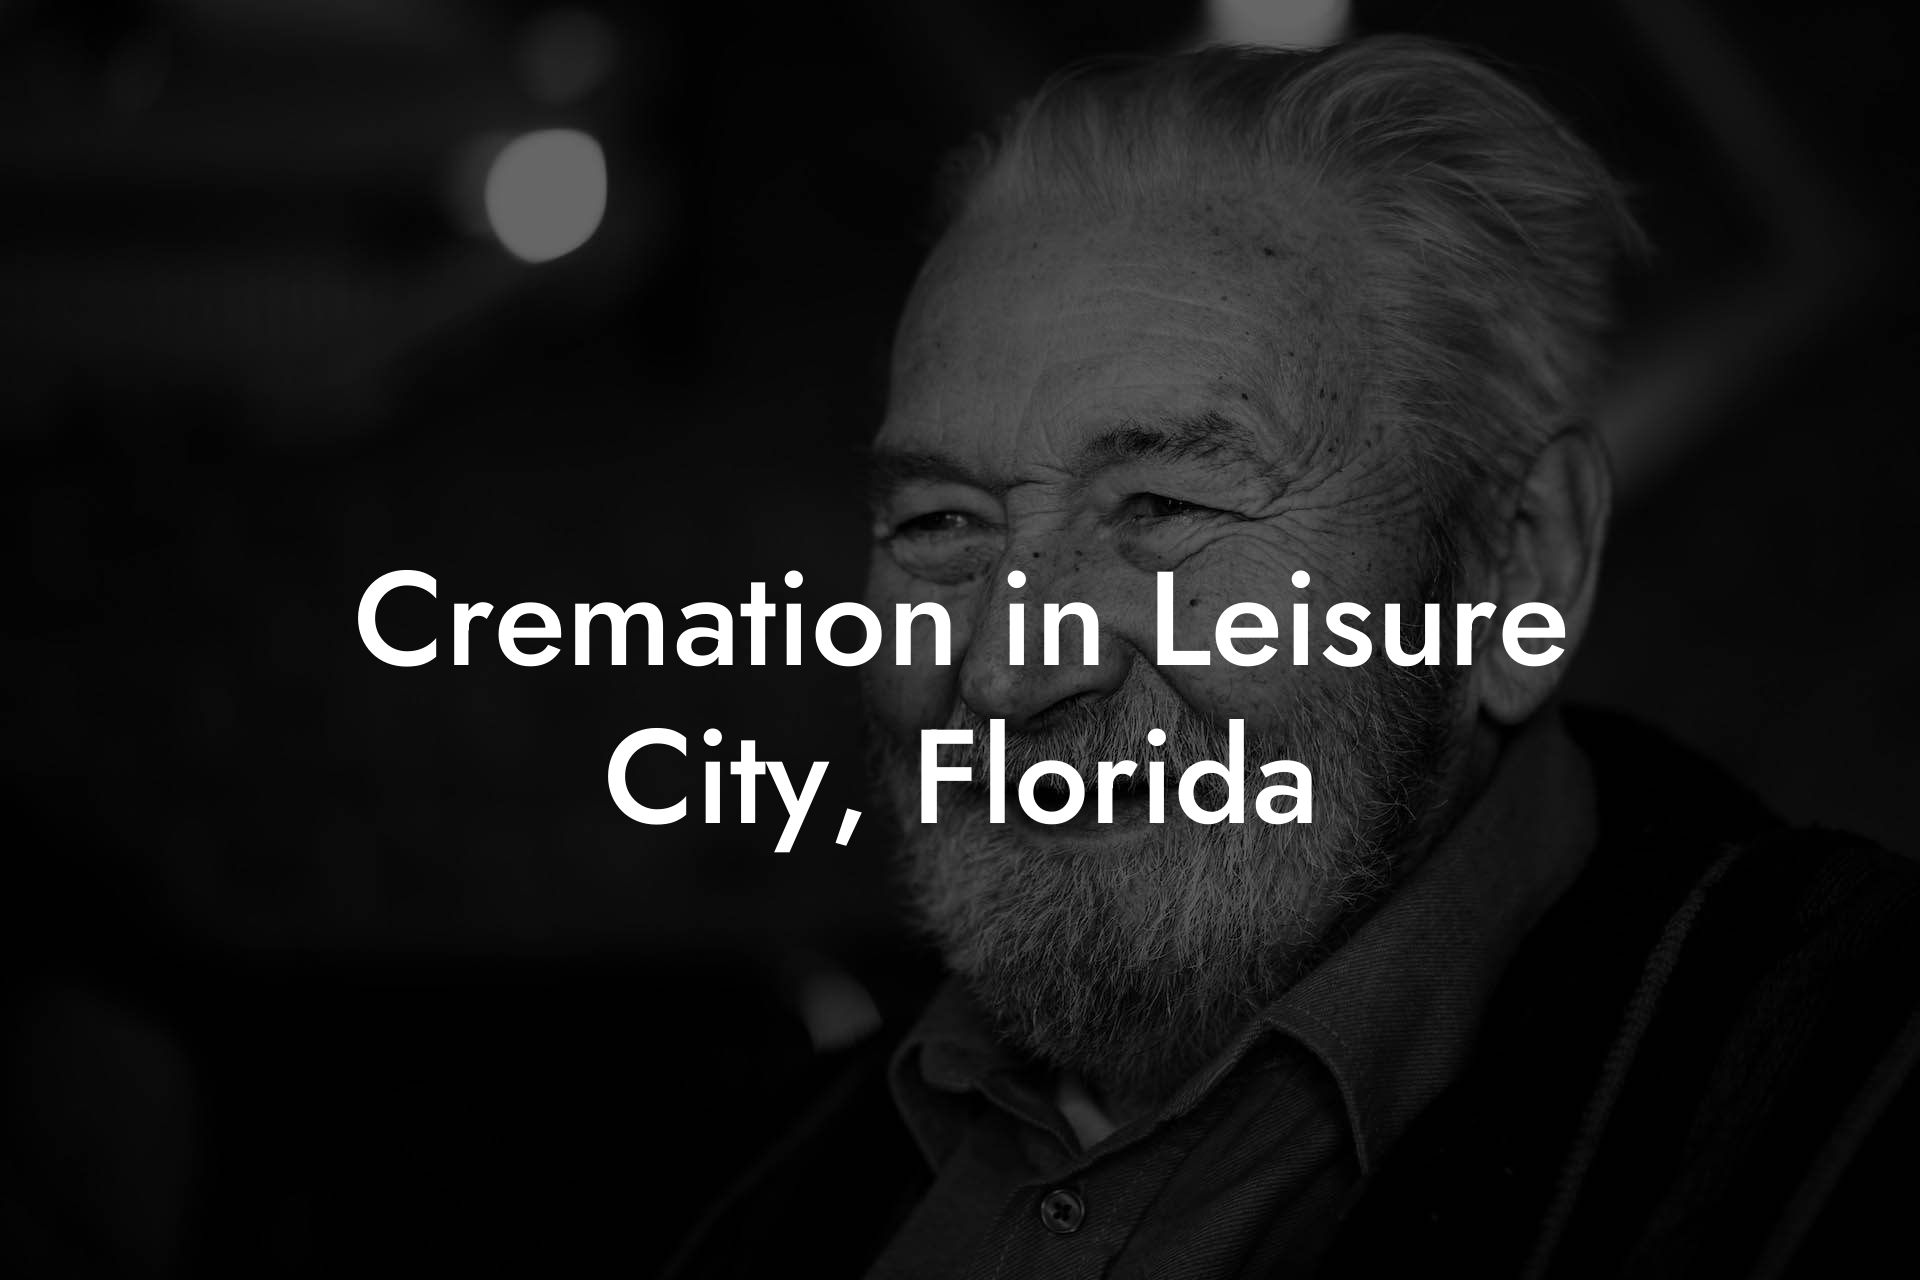 Cremation in Leisure City, Florida